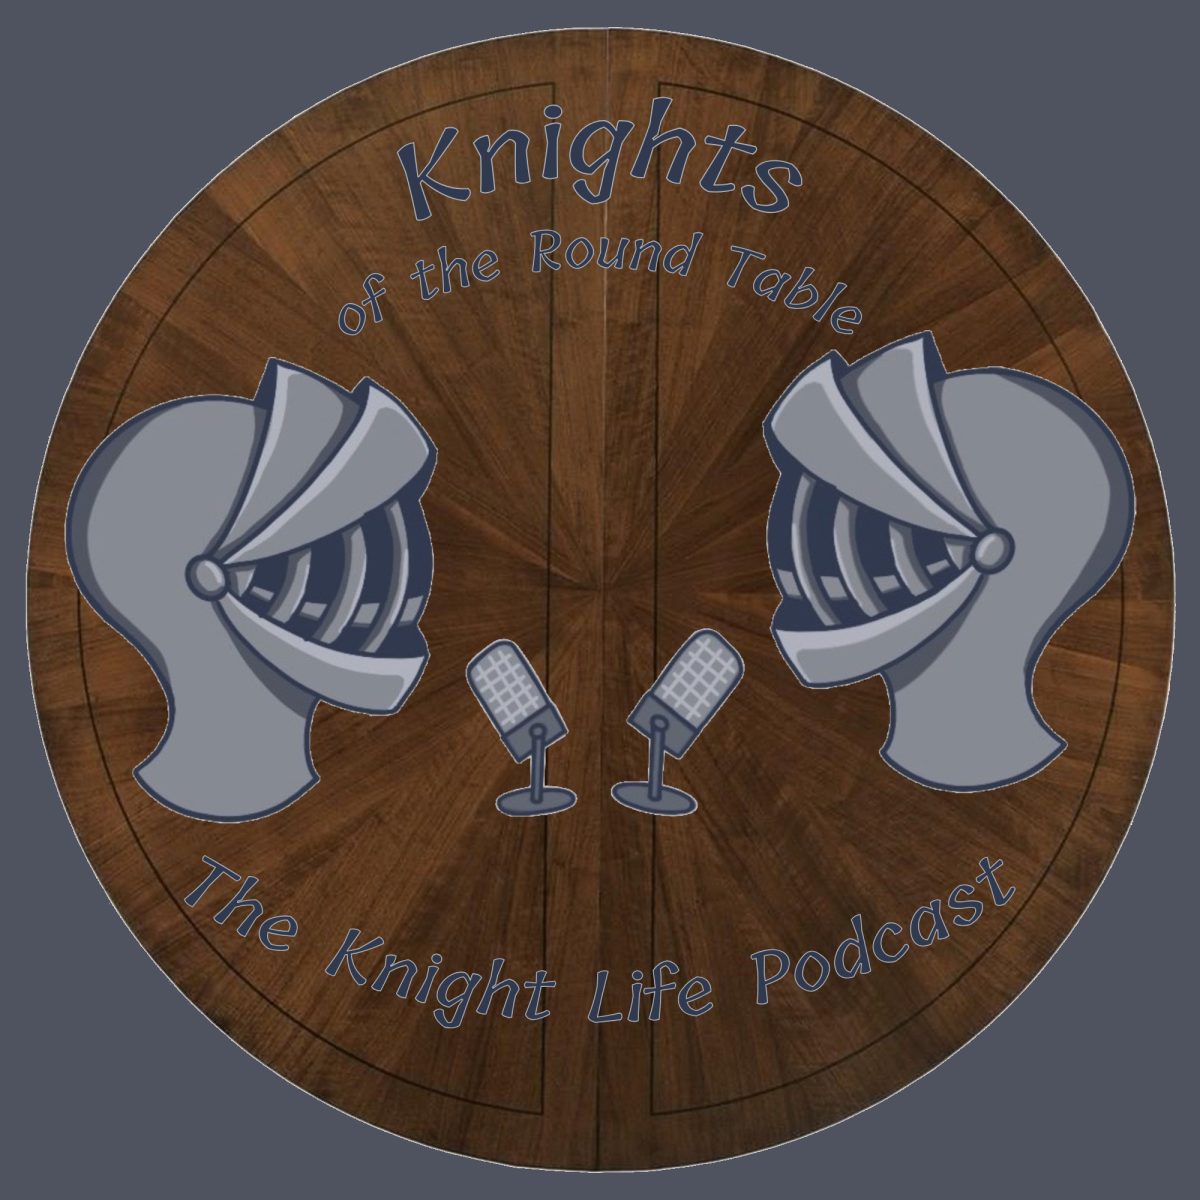 Knights of the Round Table Ep. 5 MagiTech Robotics Coach